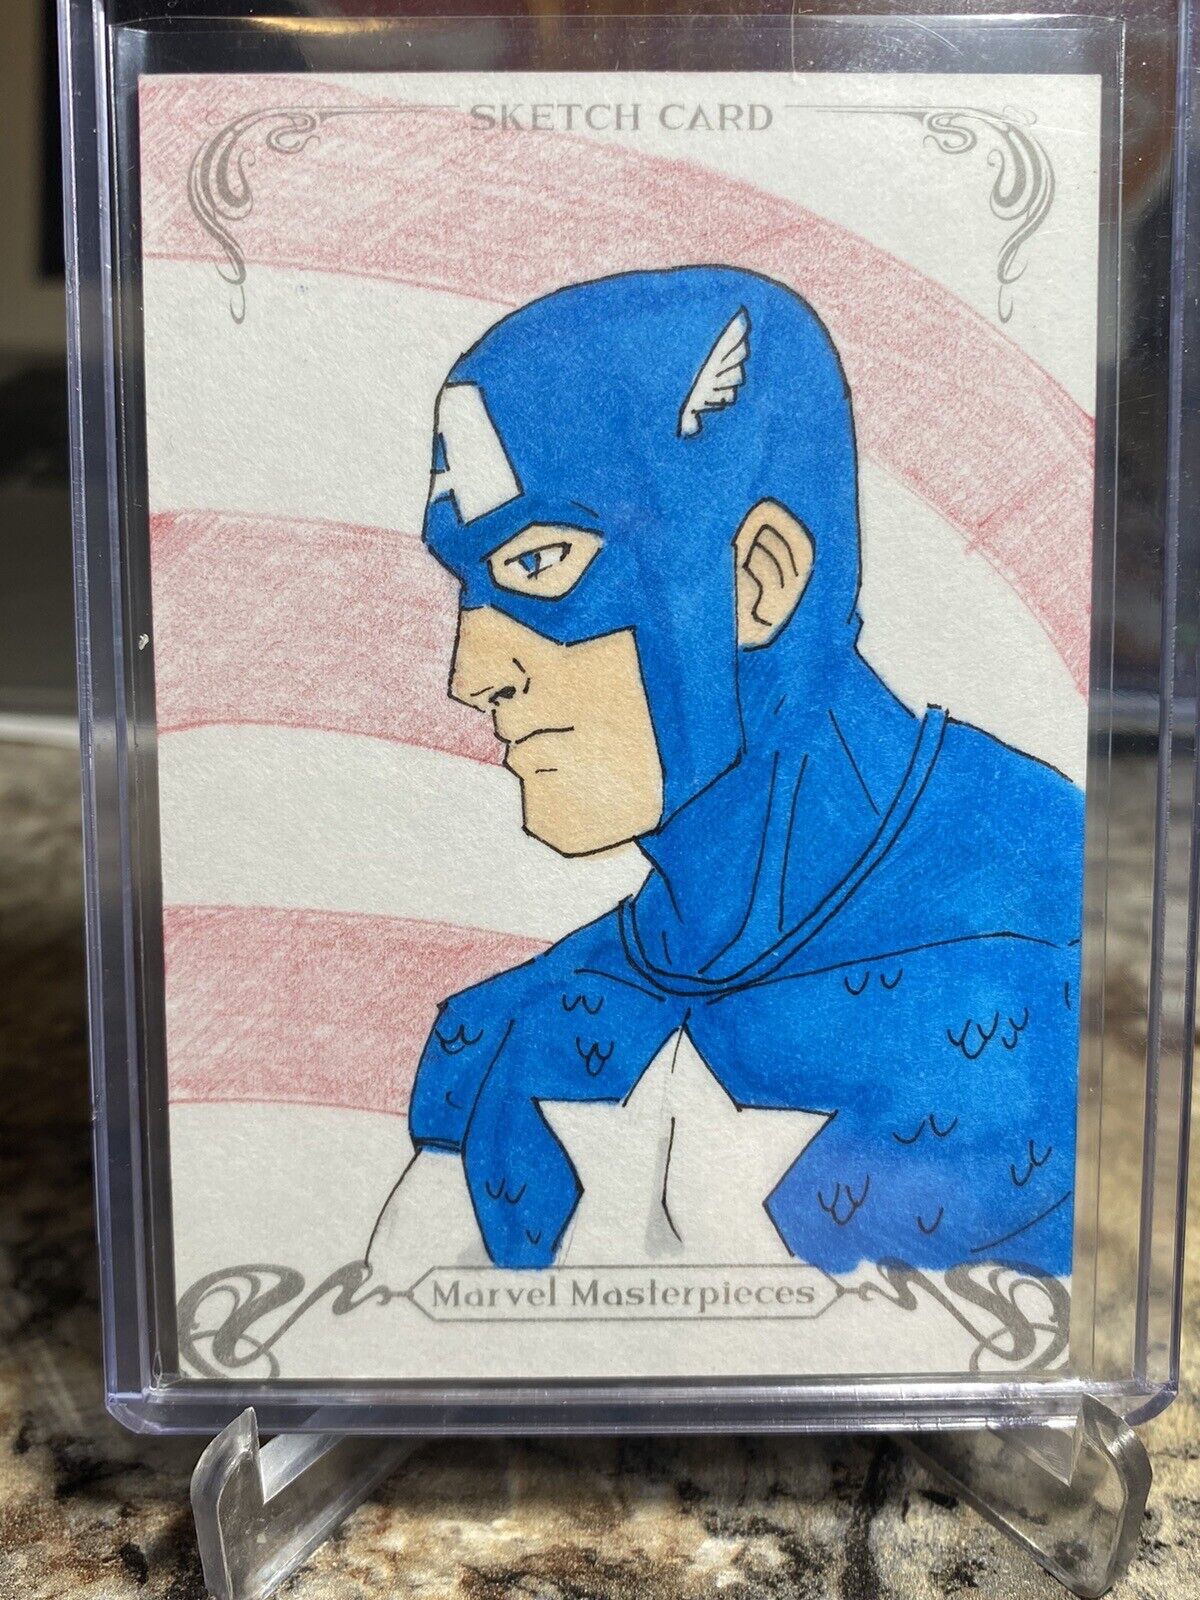 2018 Marvel Masterpieces Sketch Card Of Captain America With Artist Auto 1/1